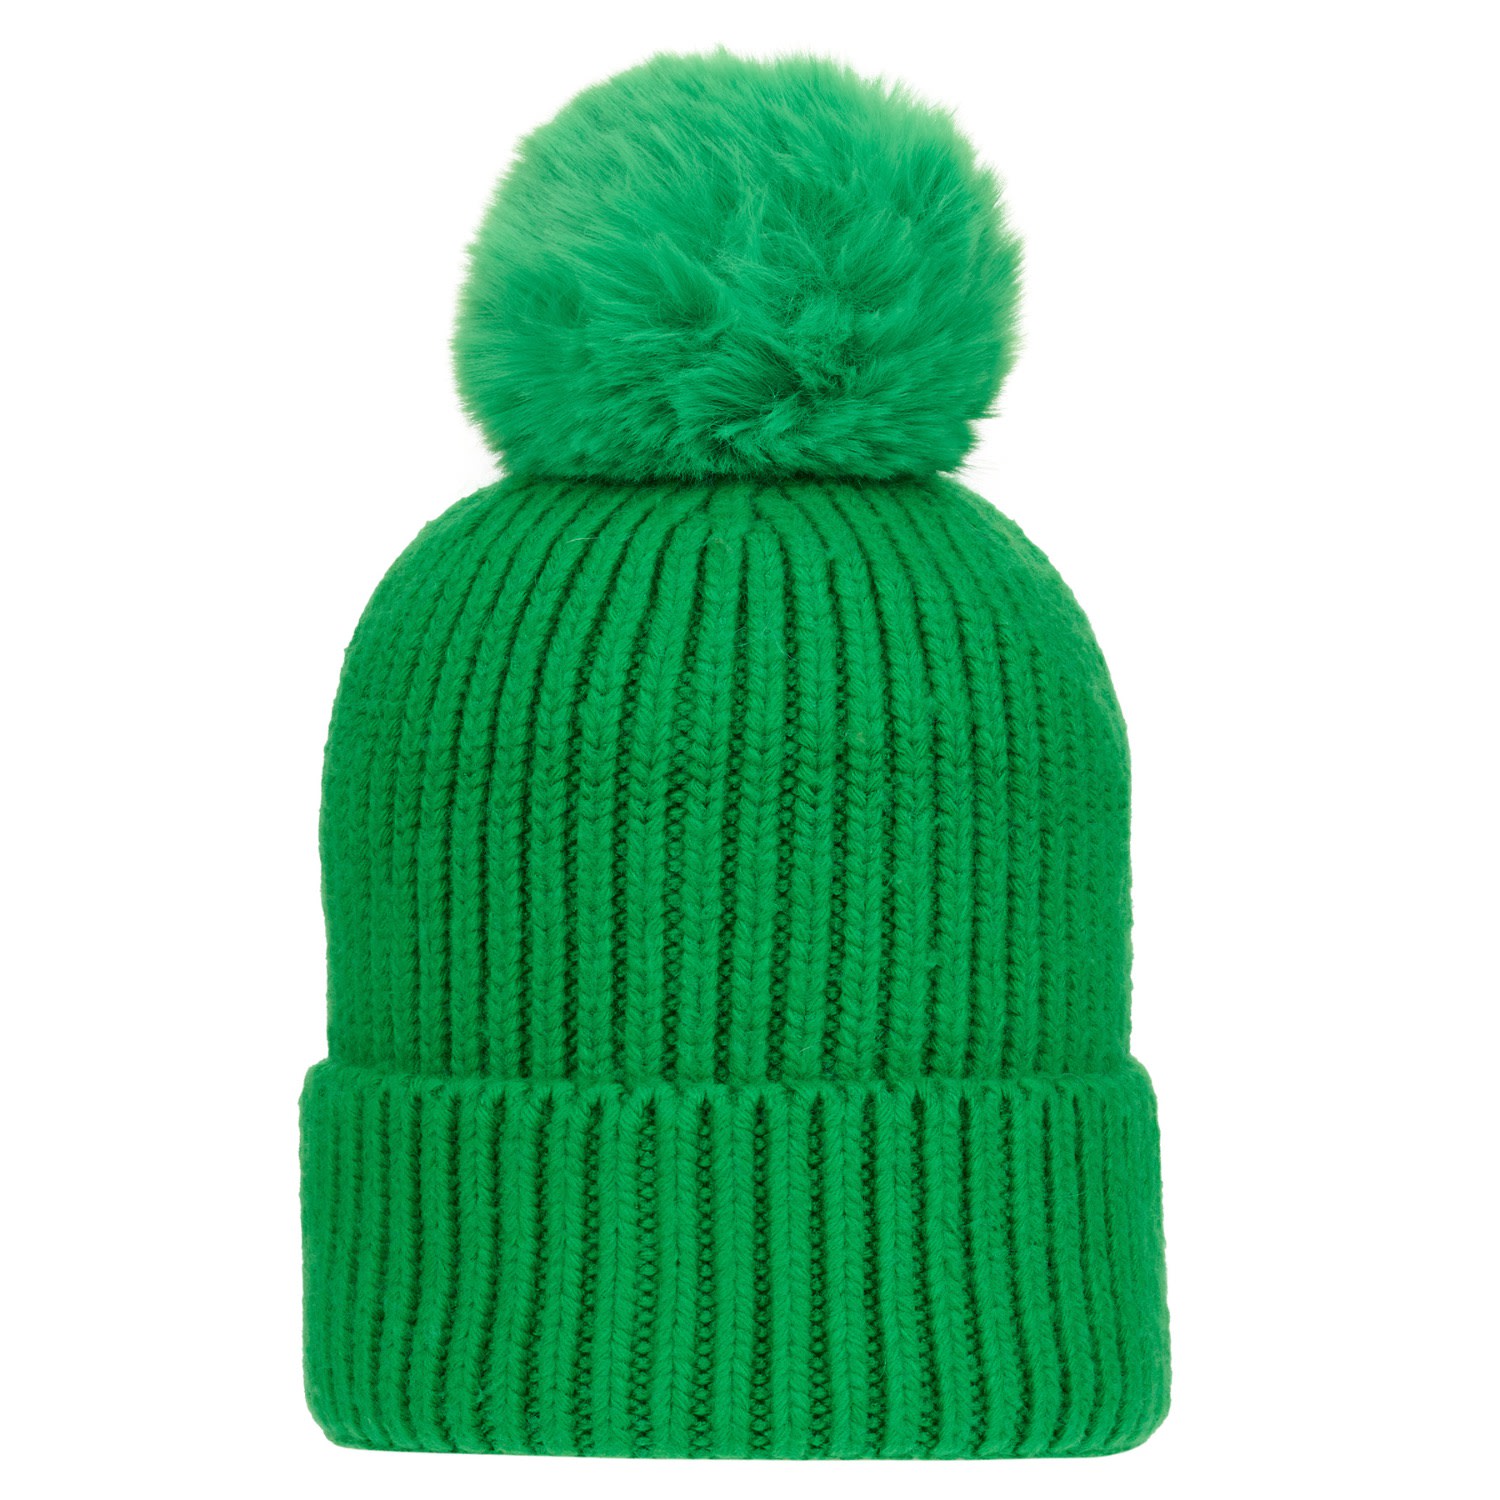 Women’s Super Soft Chunky Cashmere Mix Hat With Pom Pom In Bright Green One Size At Last...